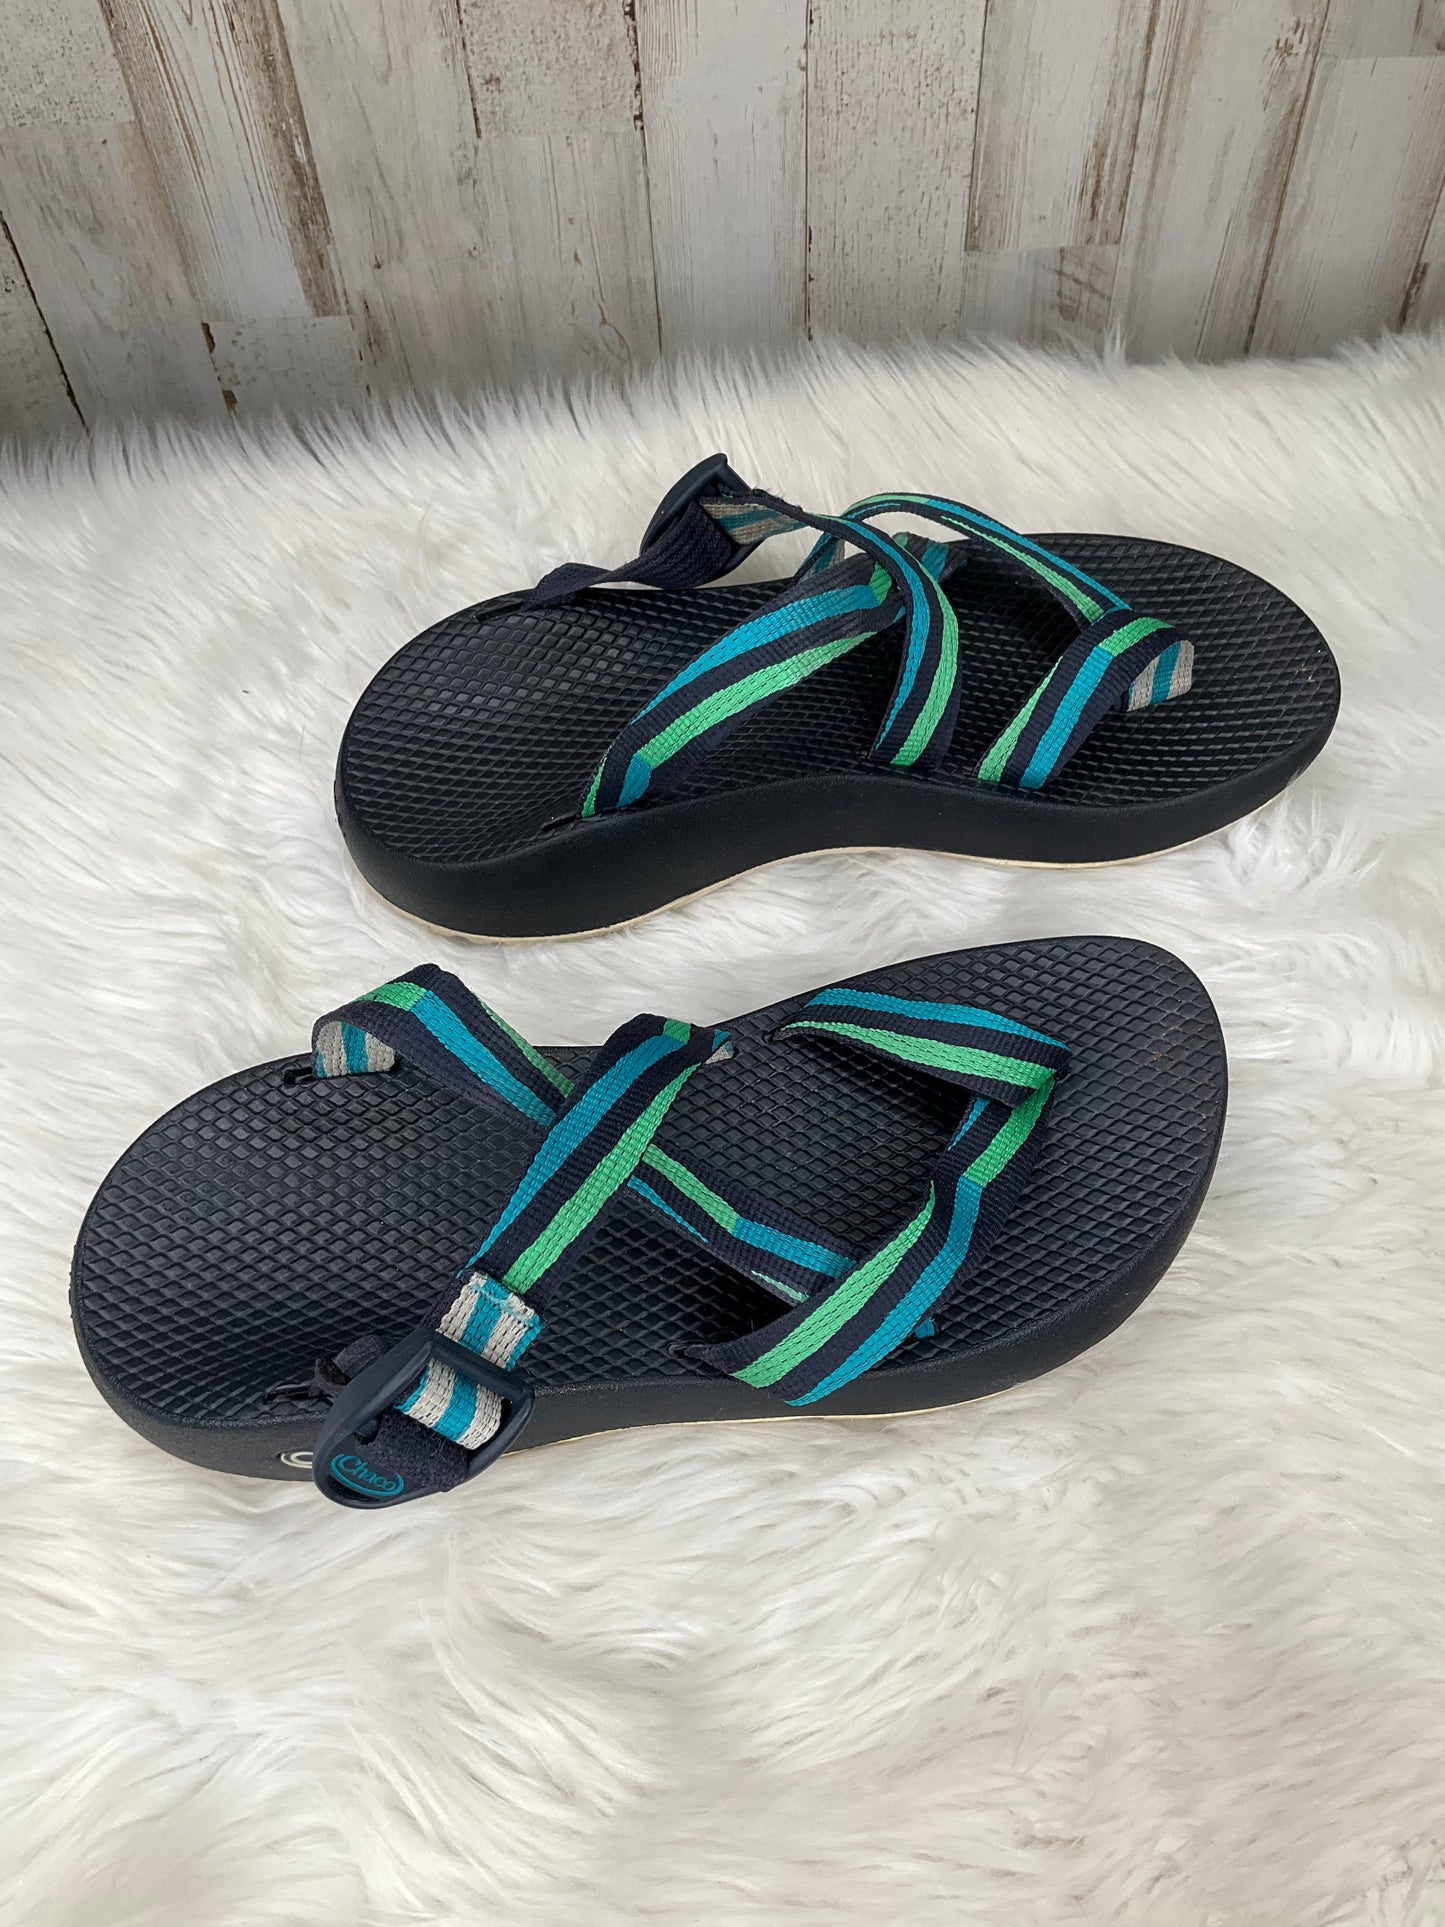 Sandals Flats By Chacos  Size: 7